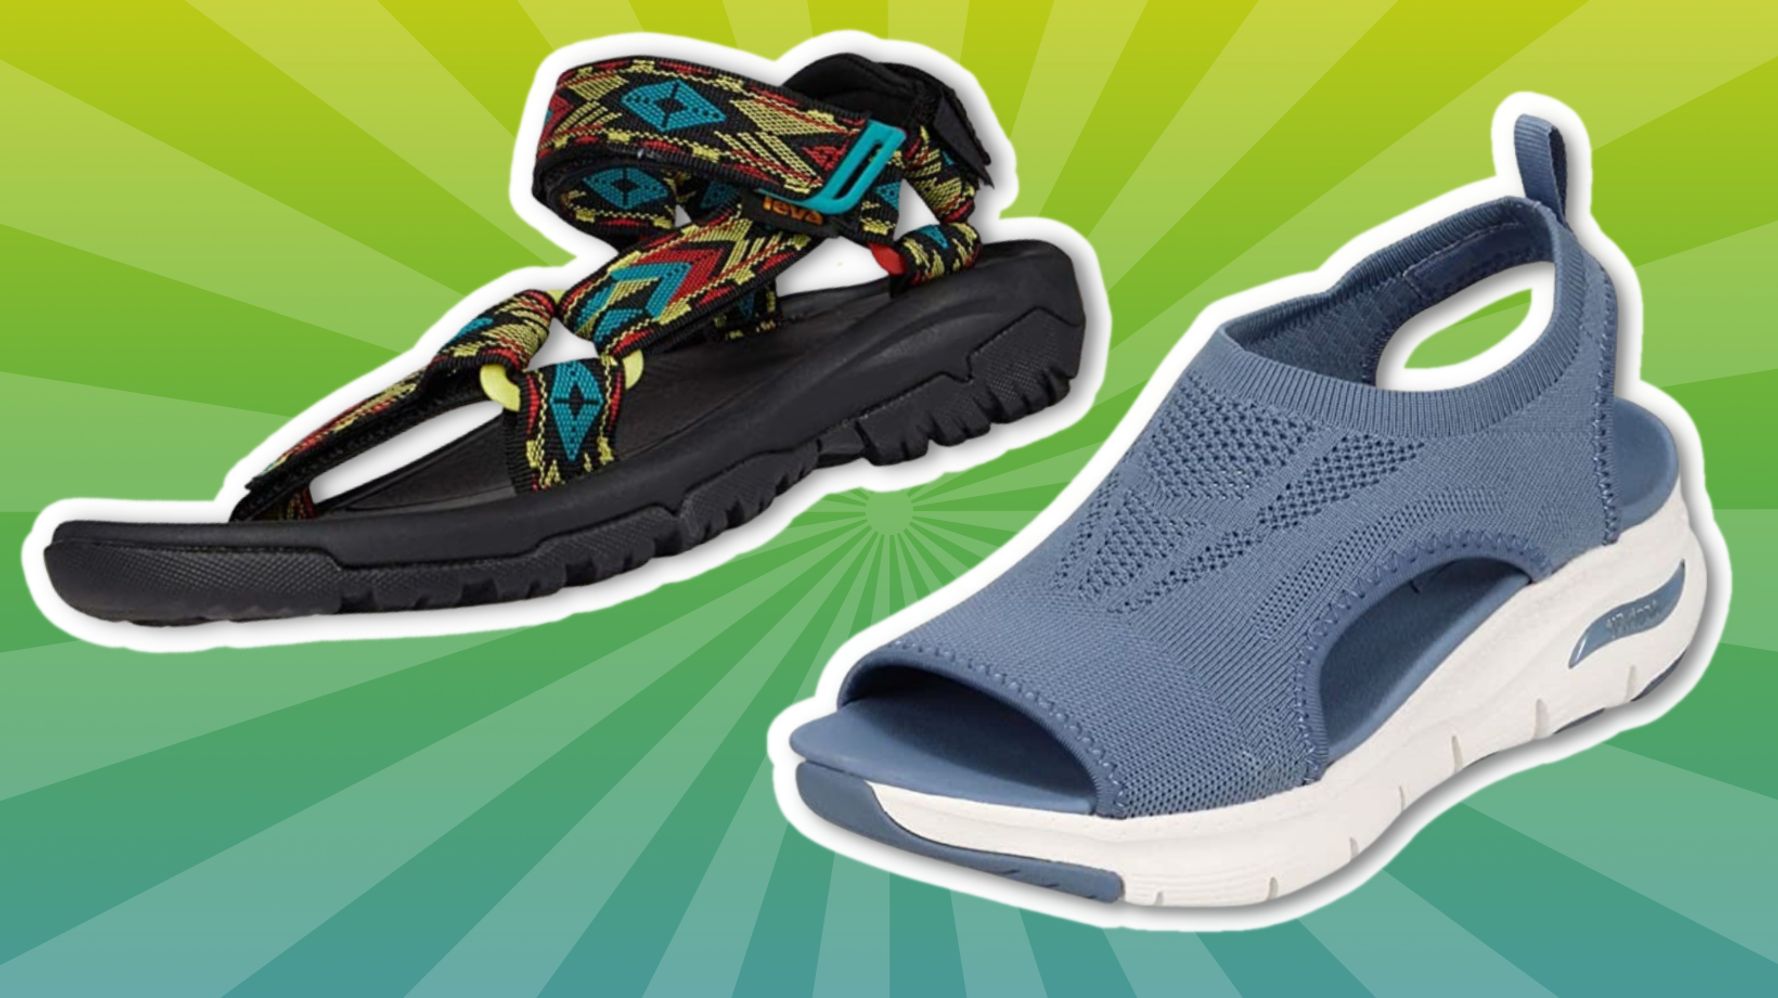 The 9 Best Walking Shoes for Plantar Fasciitis, According to a